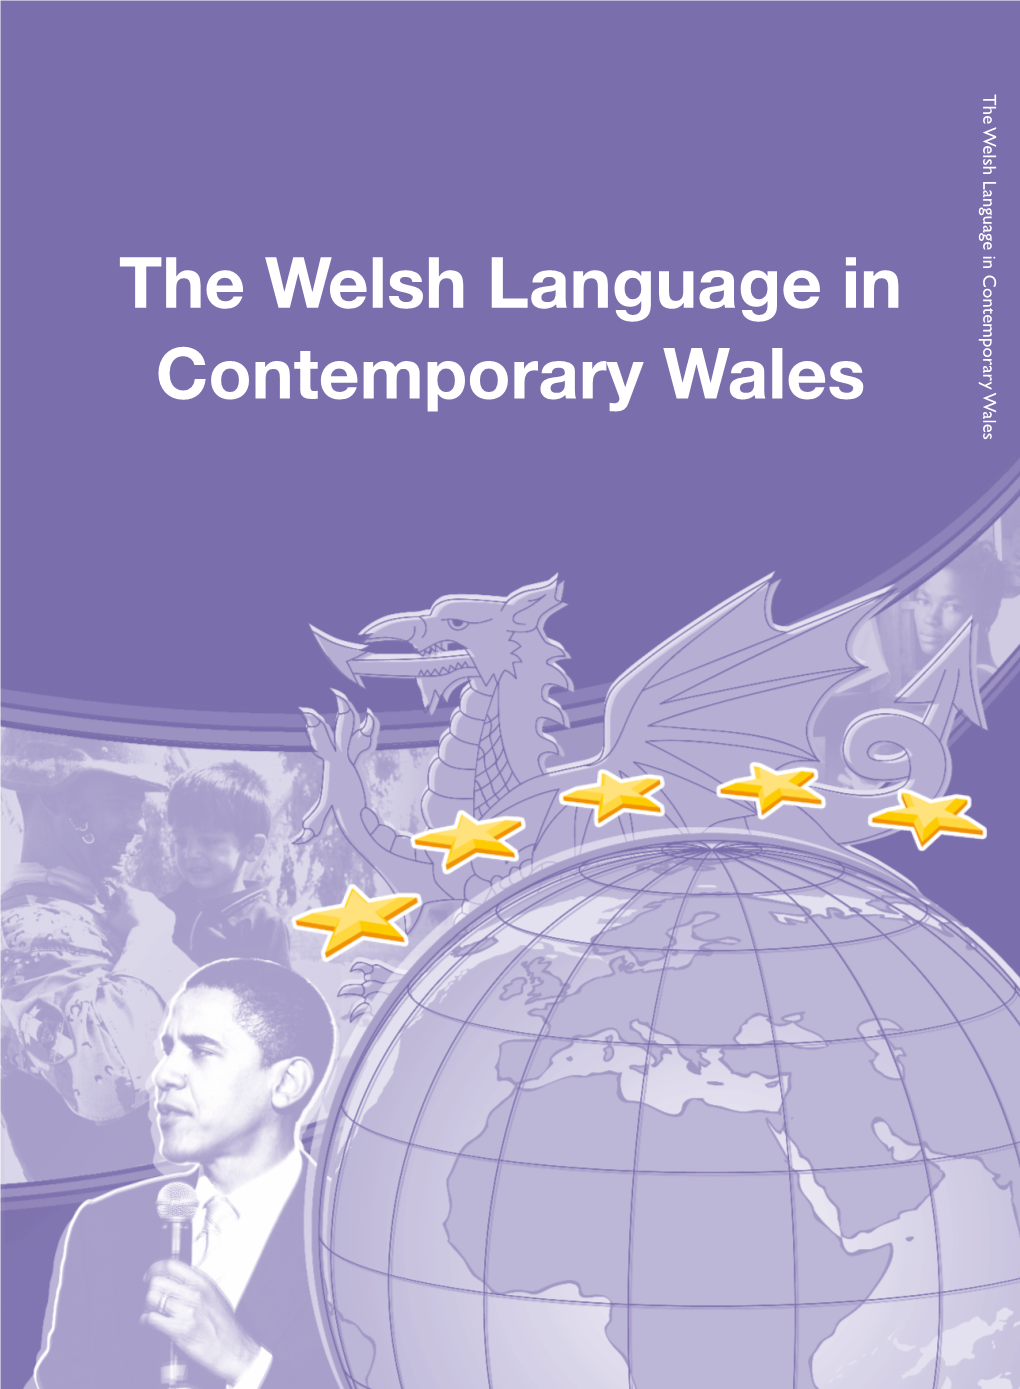 The Welsh Language in Contemporary Wales